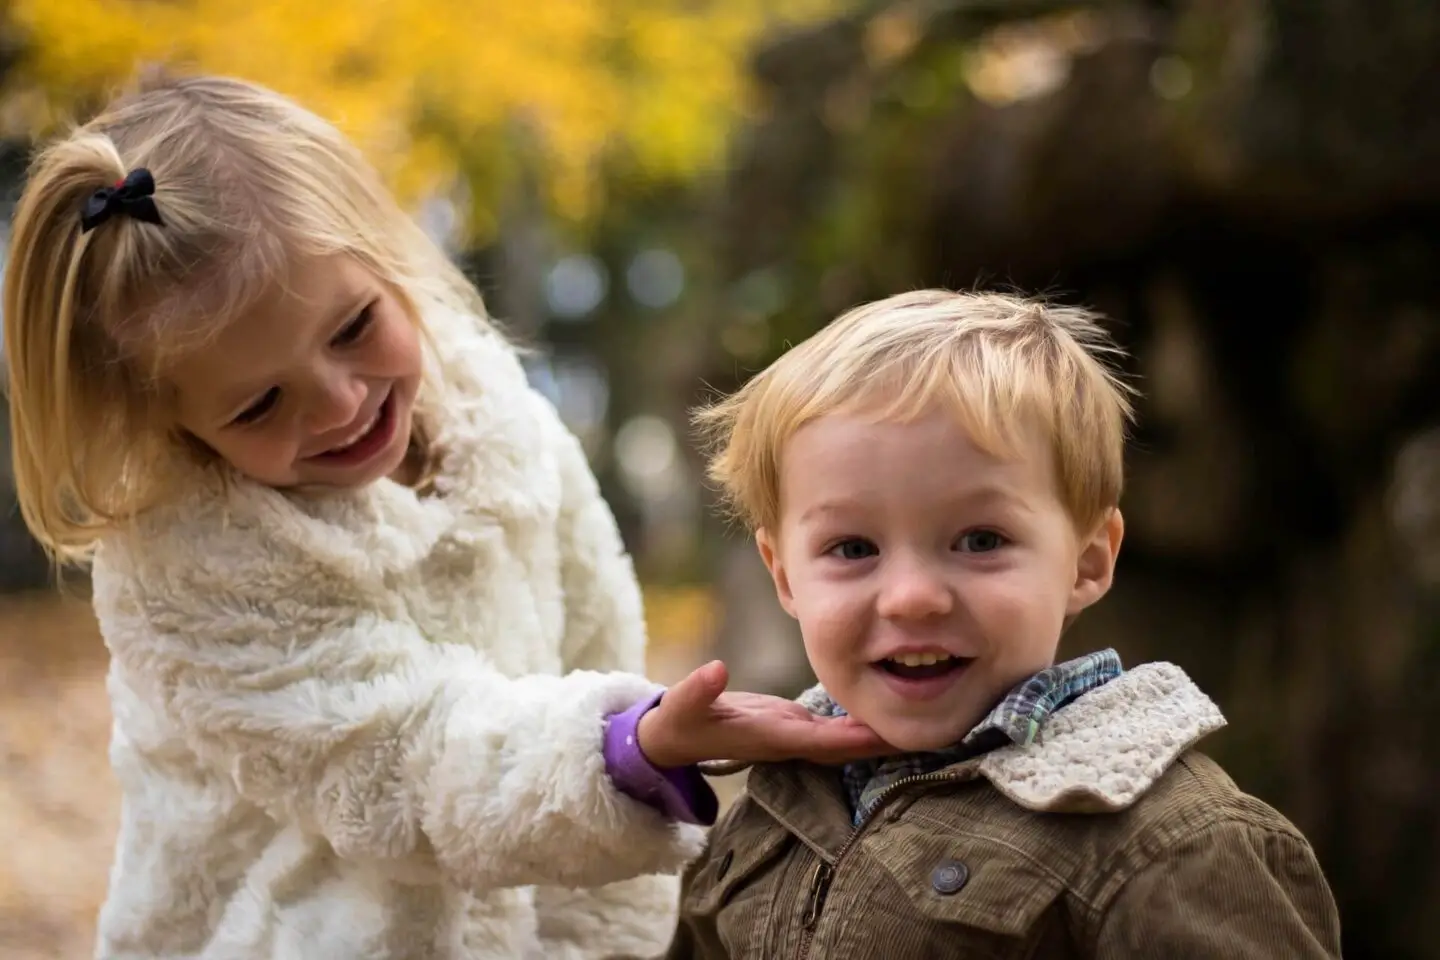 Two blonde siblings. The sister is touching the brothers chin, as if to turn his face towards her. They are wearing jackets and are outside